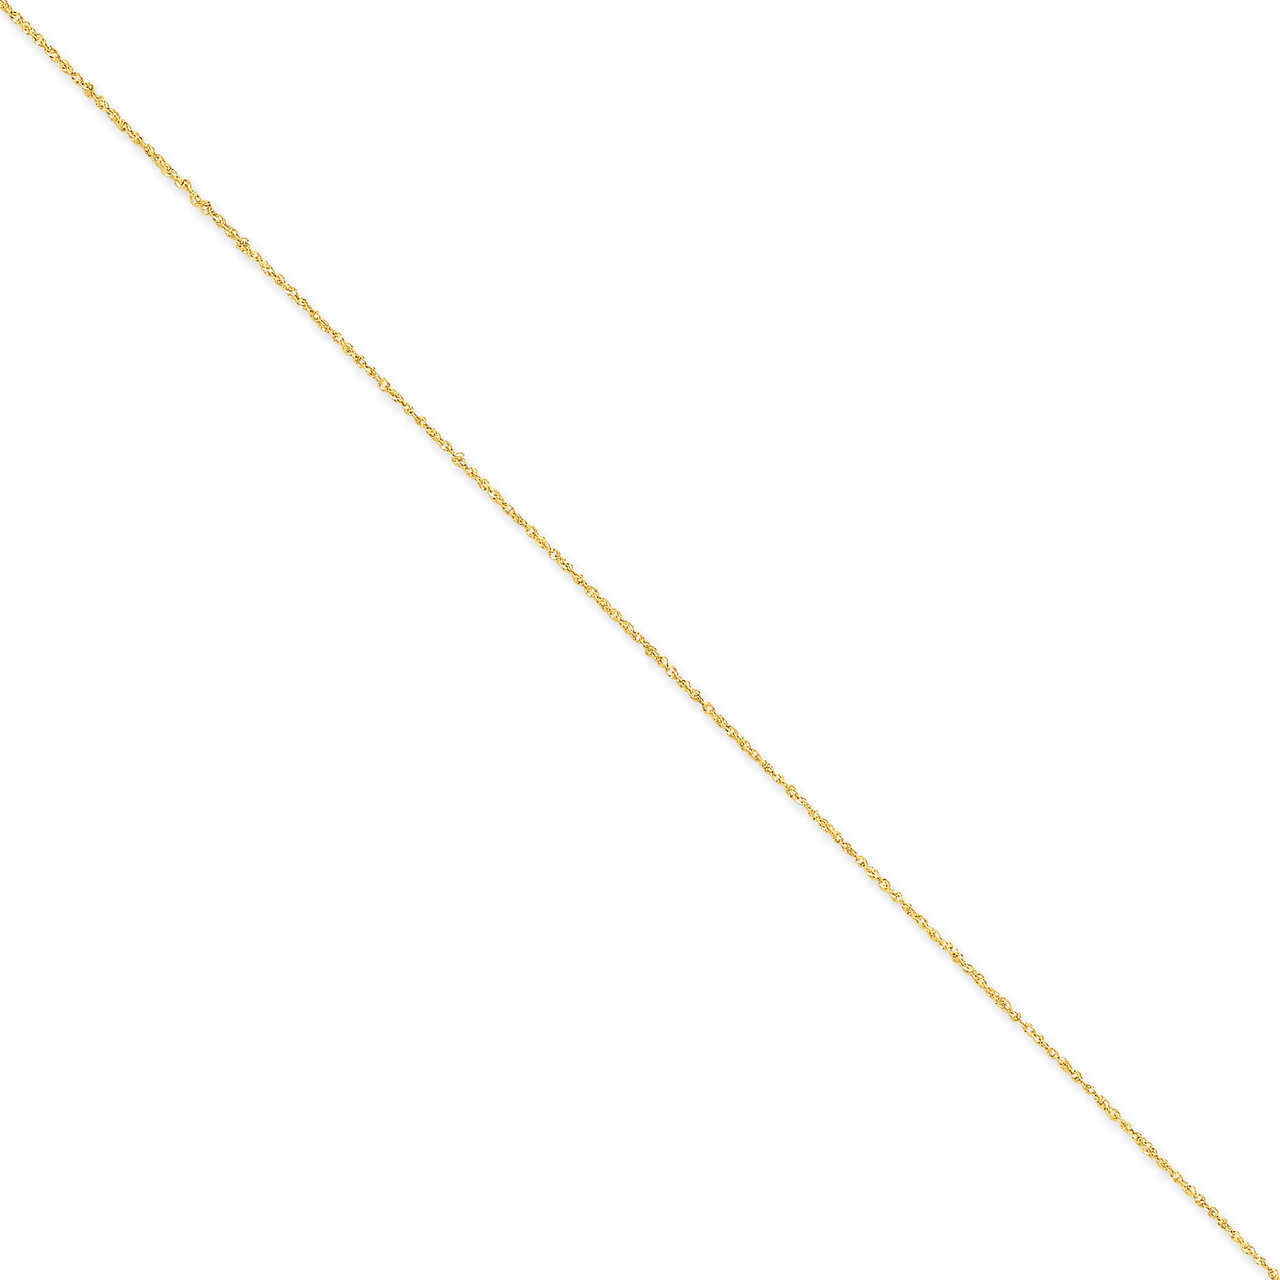 1.1mm Ropa Chain 18 Inch 14k Gold RPA020-18